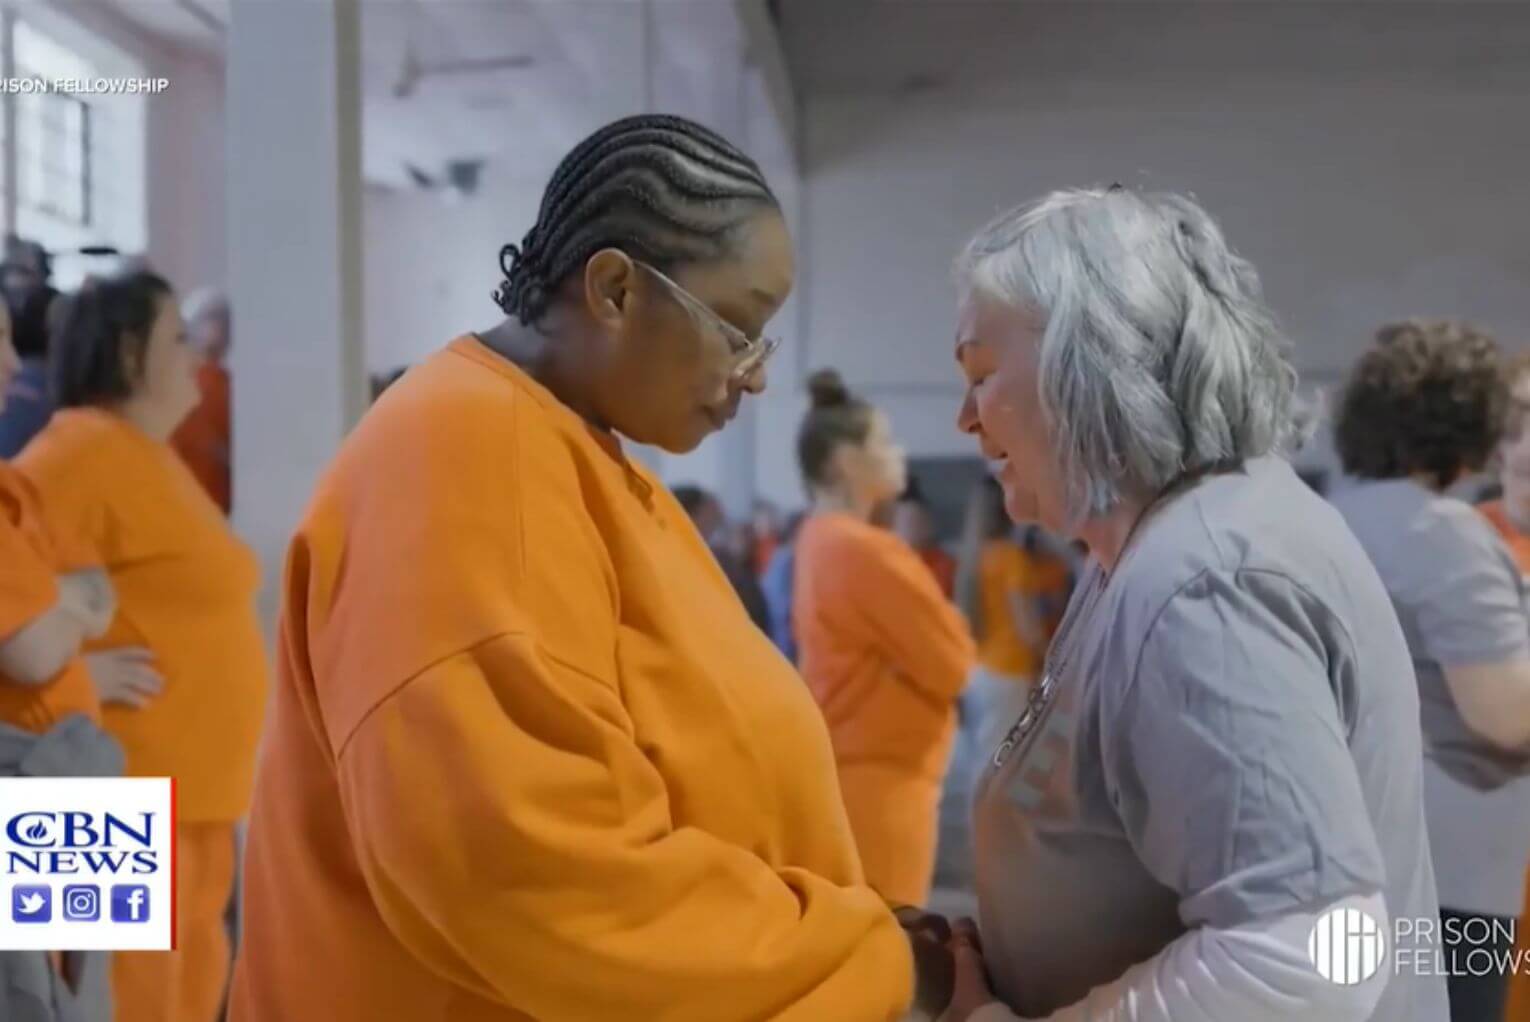 ‘The Chosen’ Transforms Inmates’ Lives in Prisons Across America